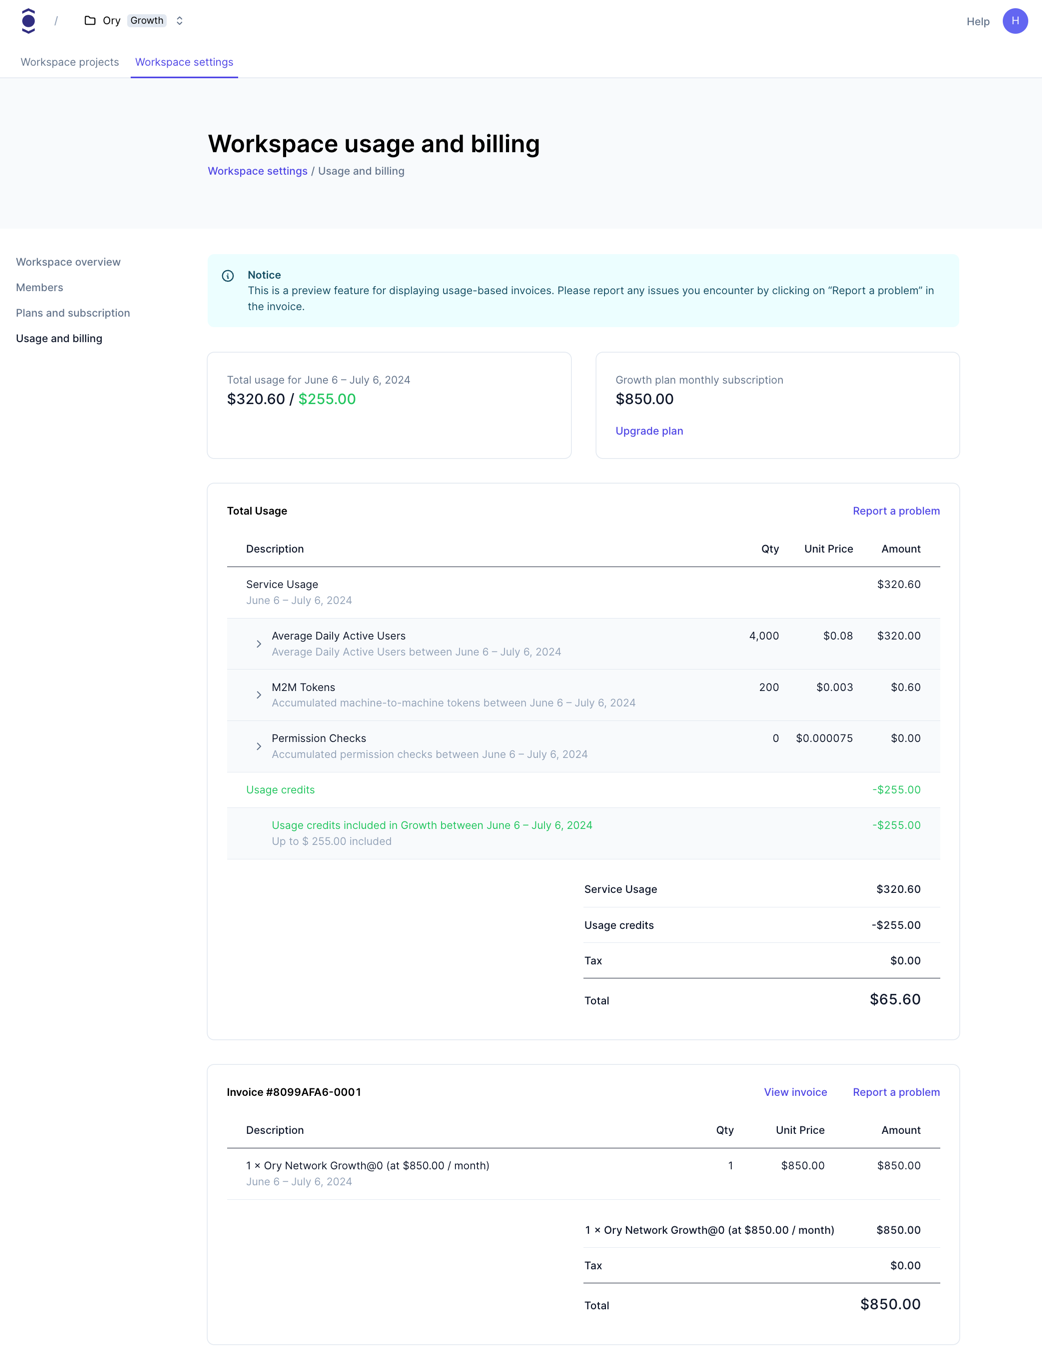 Usage-based Invoices